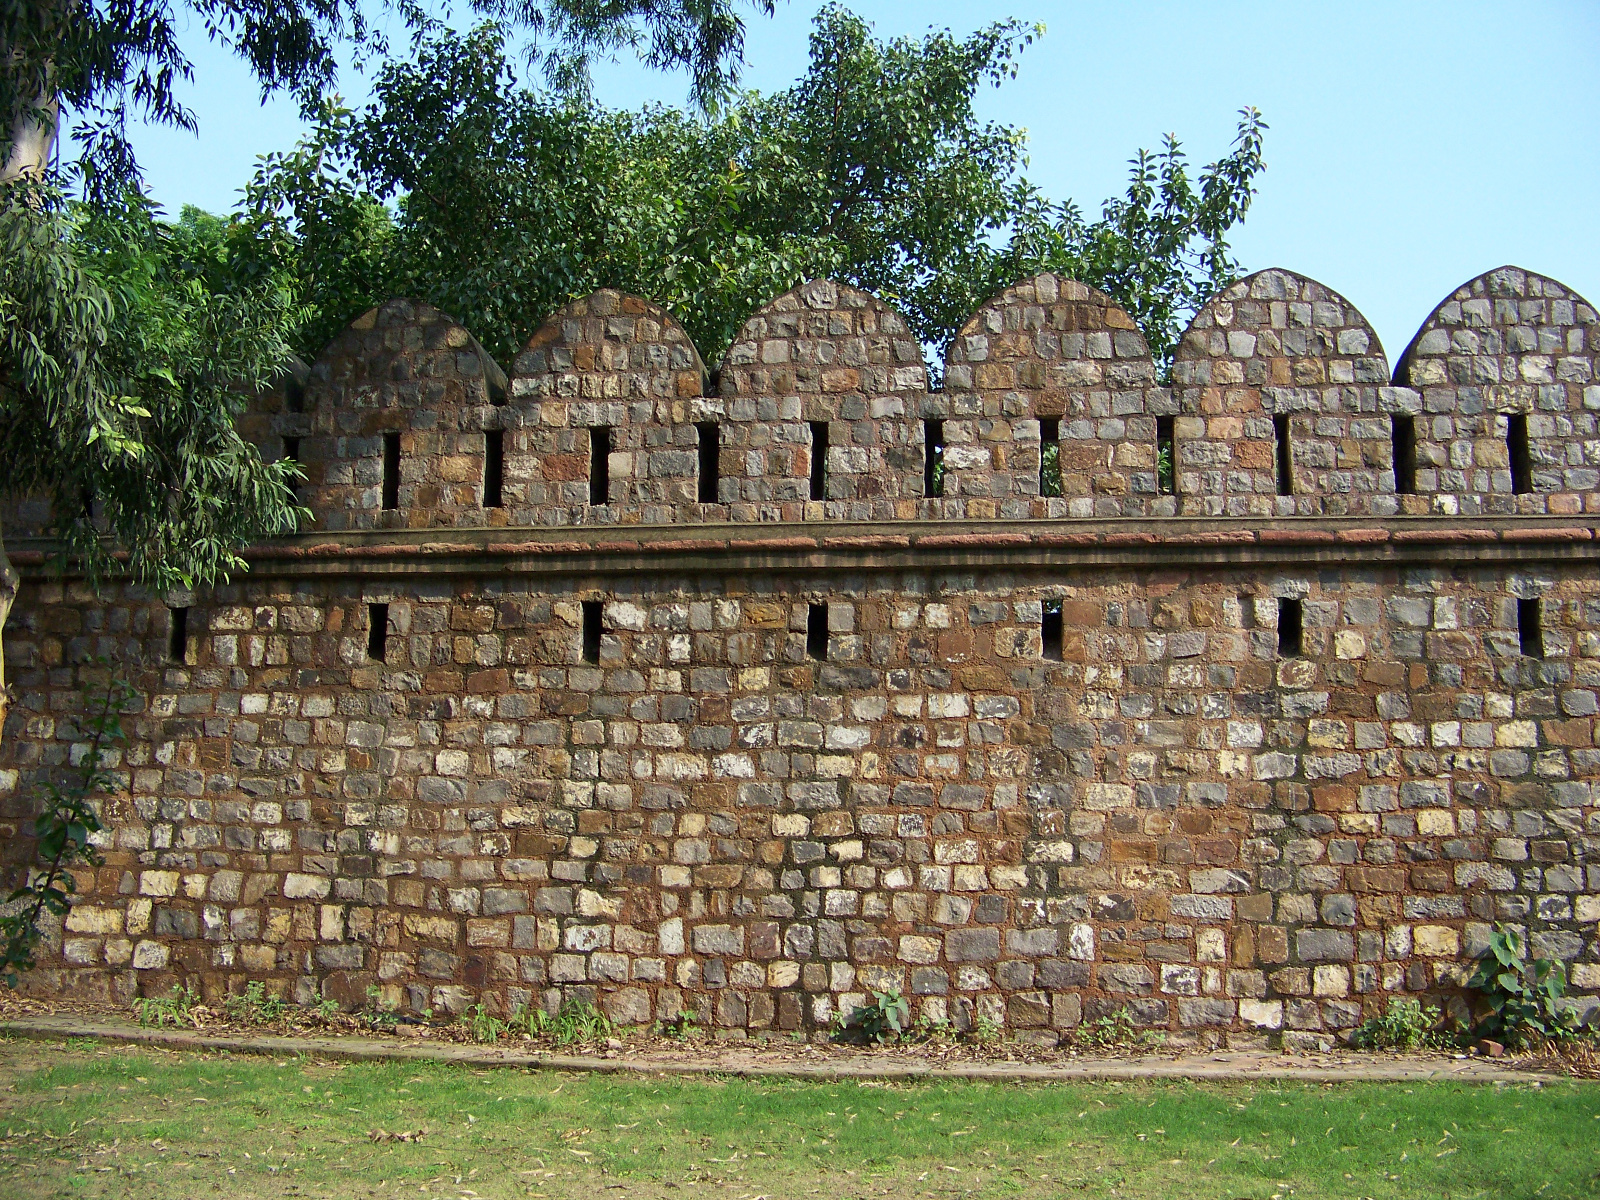 One of the preserved sections of wall near Kashmiri Gate.